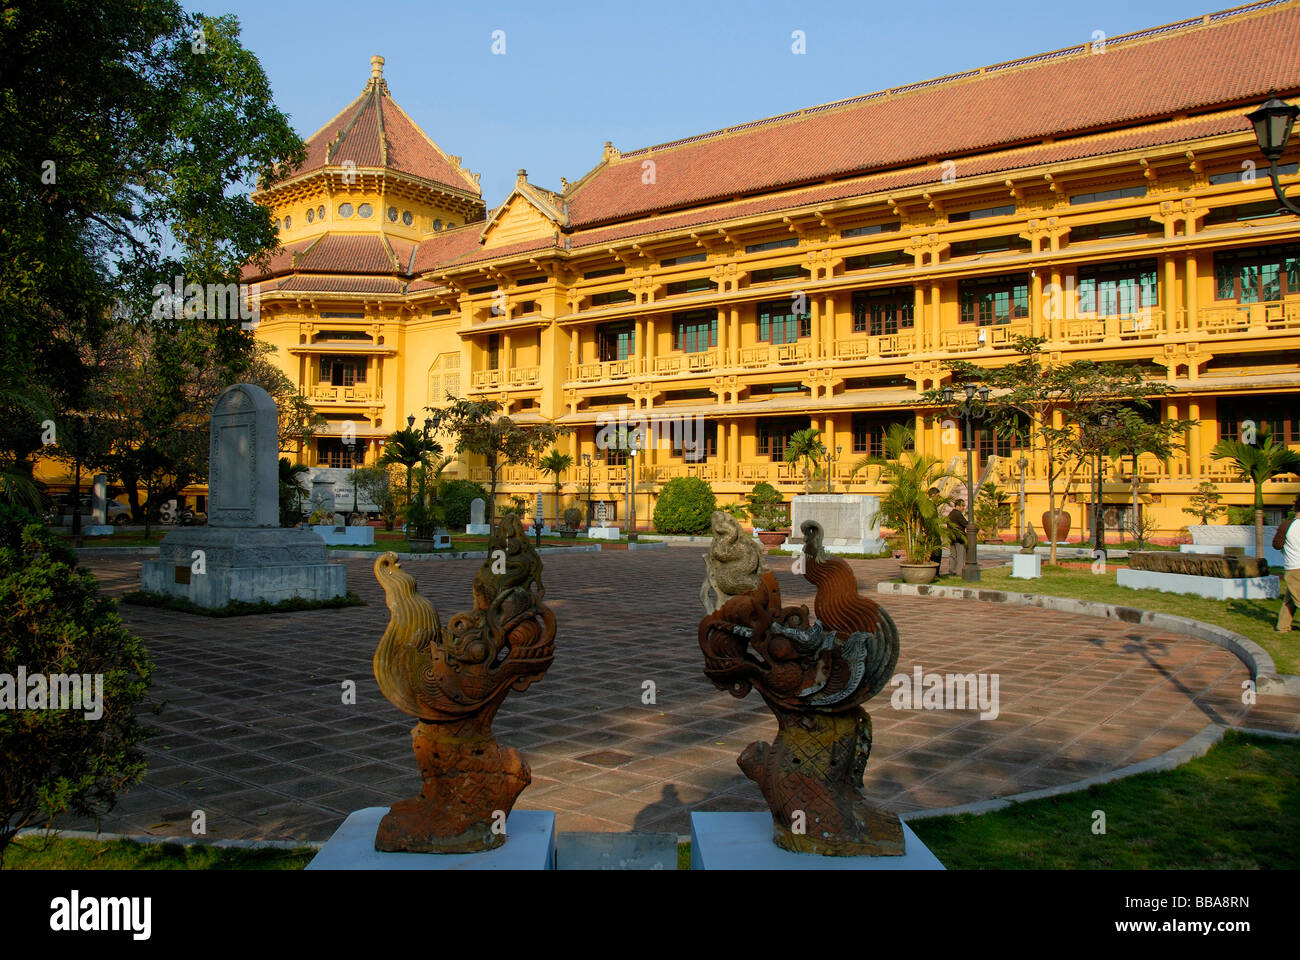 Colonial building, painted yellow, Museum of Ethnology, Hanoi, Vietnam, Southeast Asia, Asia Stock Photo